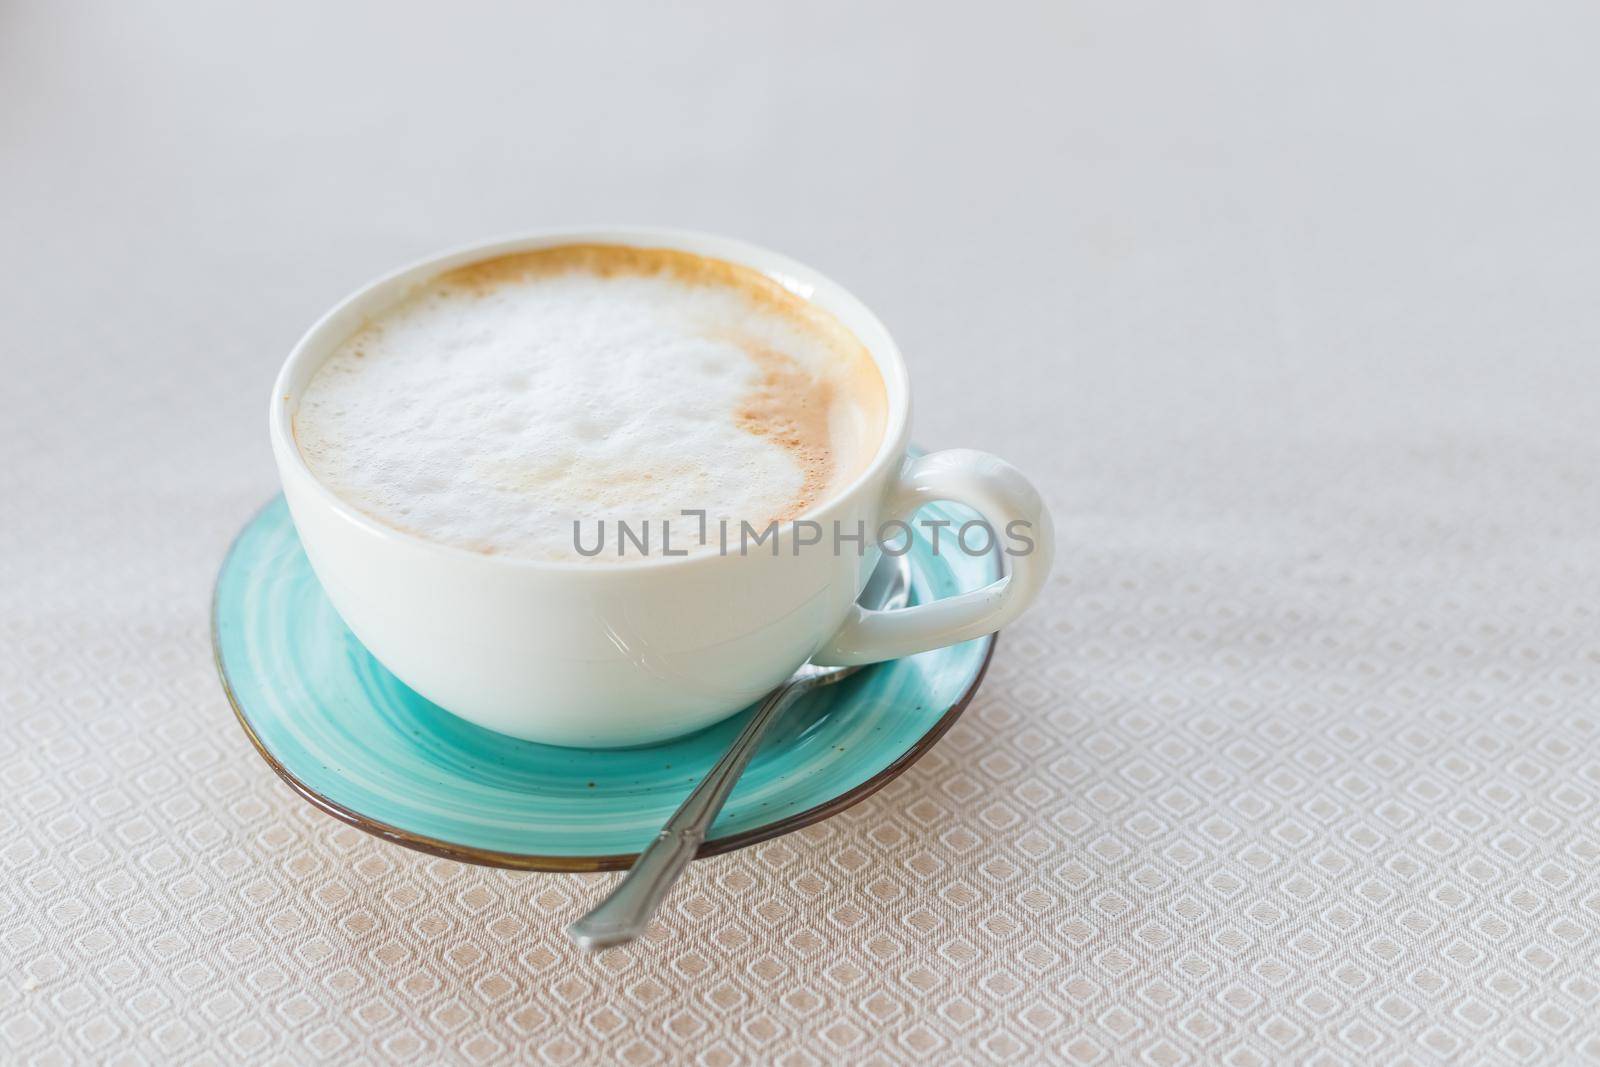 Hot coffee cappuccino latte art in jade color cup isolated on beige table.Cappuccino coffee cup top view.Latte art on milky foam.Hot Italian energizing beverage served in green ceramic mug by YuliaYaspe1979